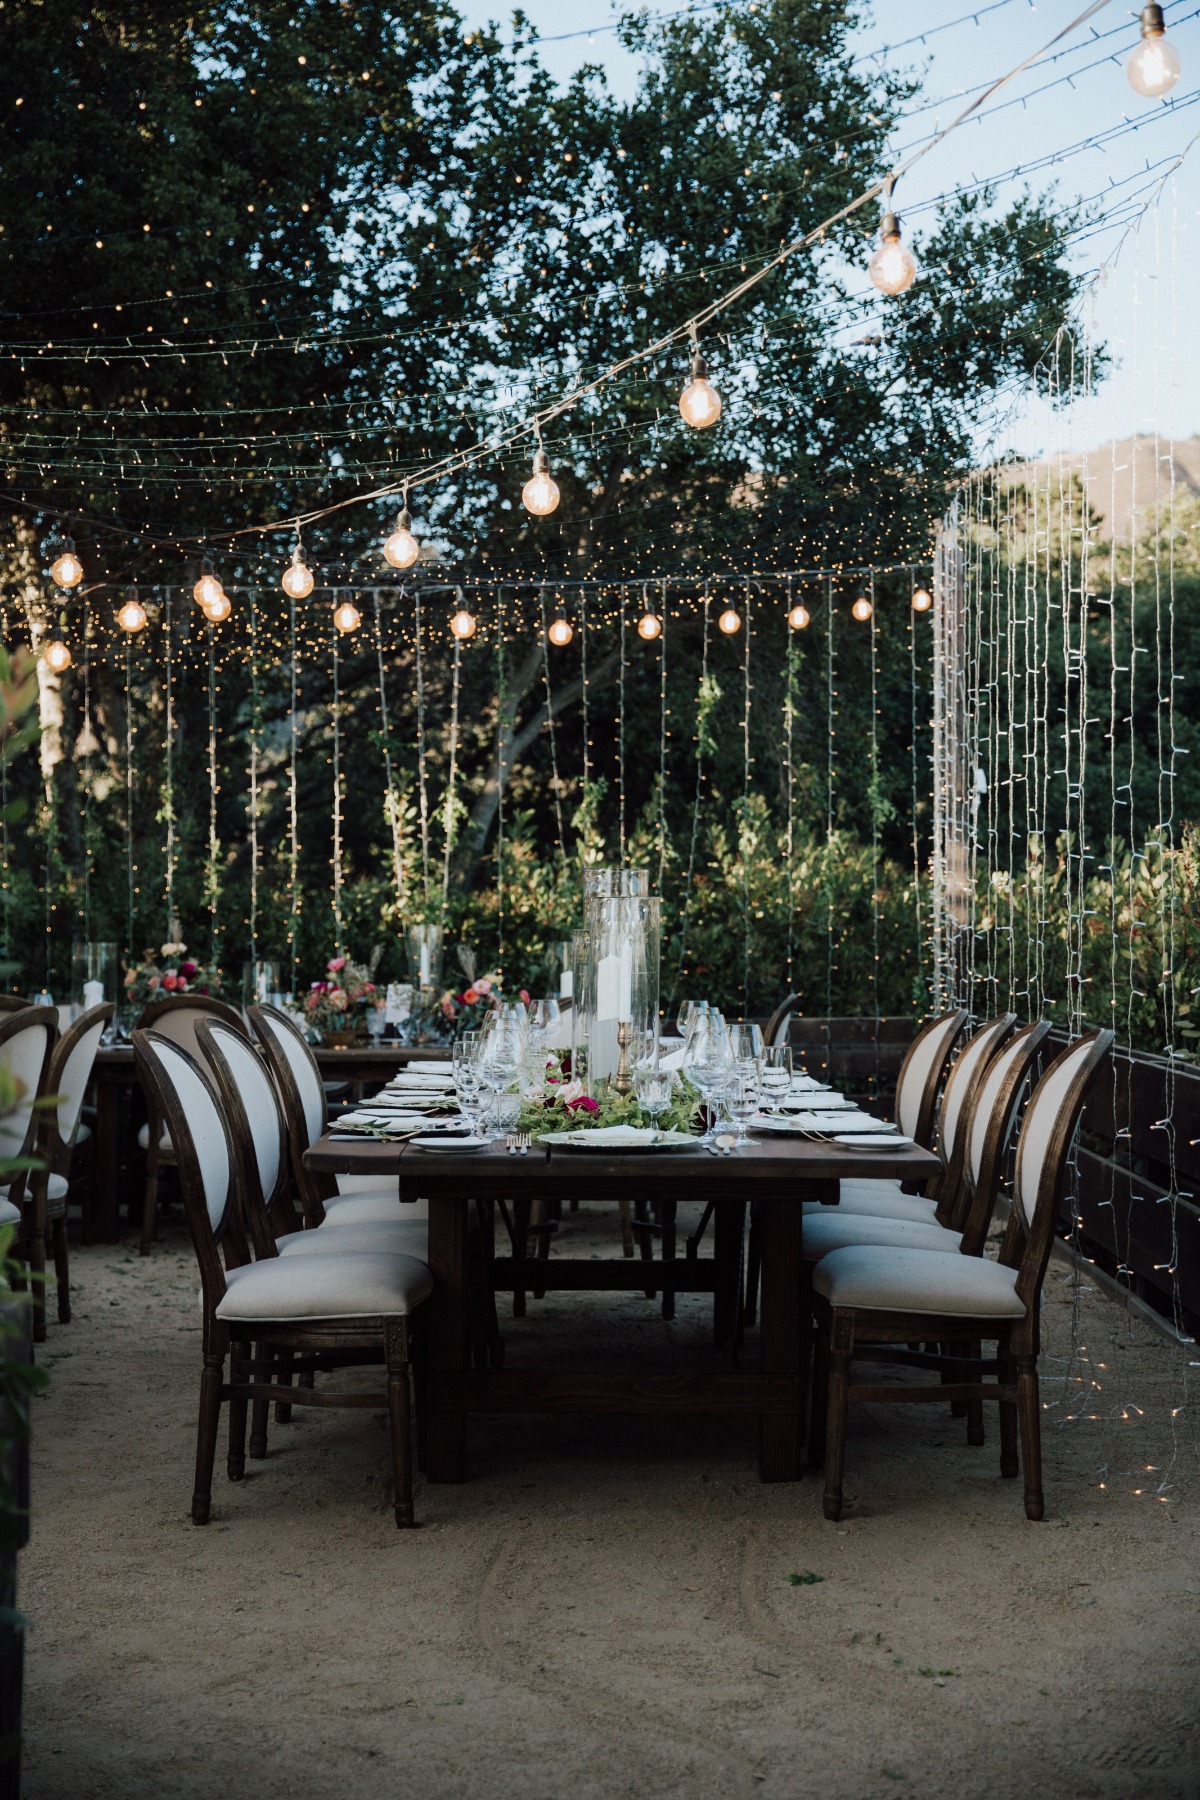 how to mix string light sizes for wedding